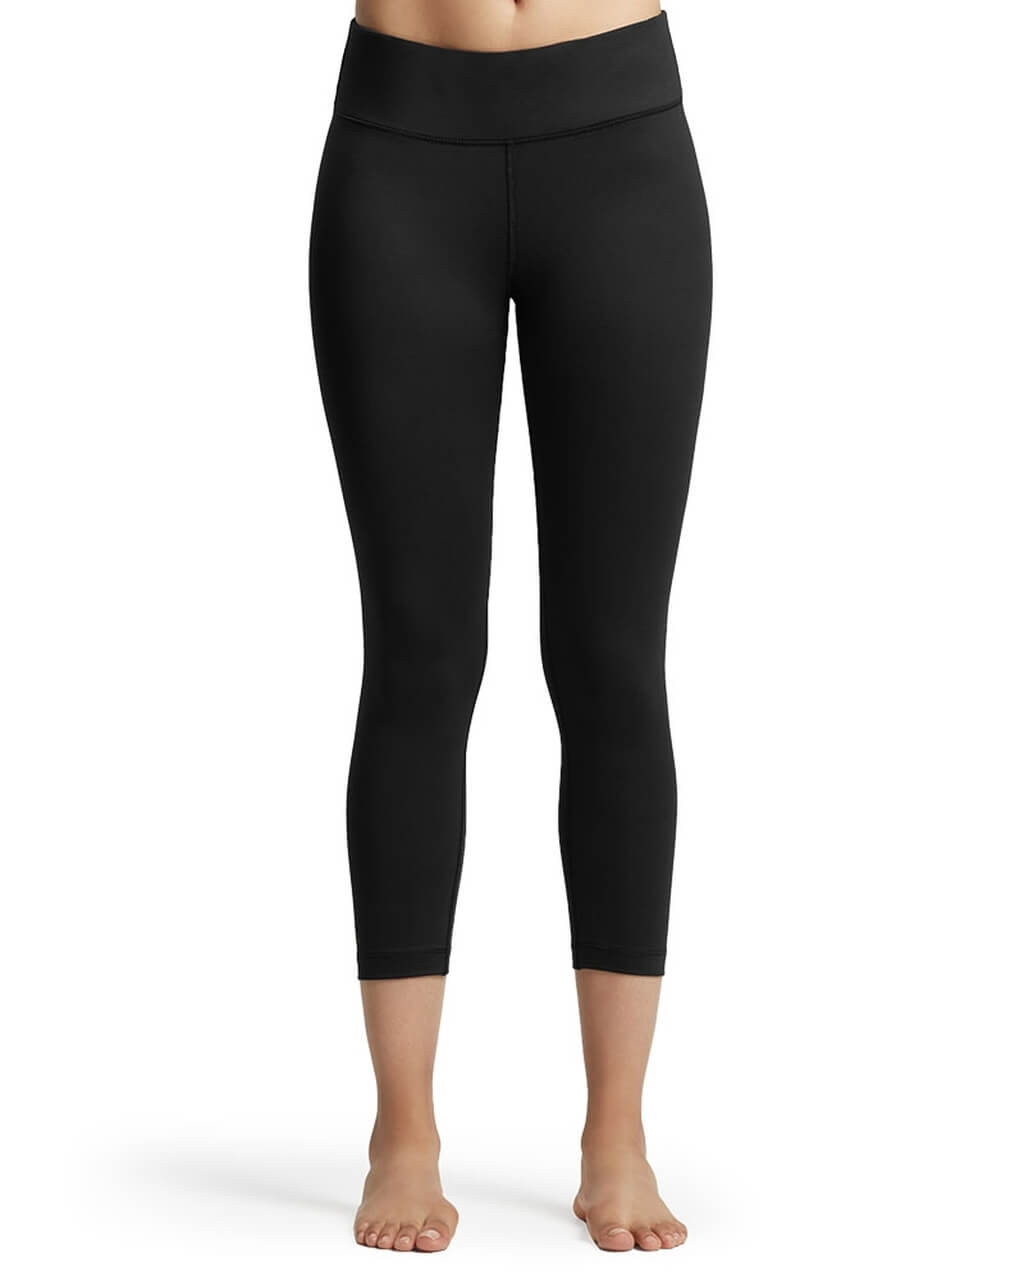  Tommie Copper Women's Core Compression Capris I Breathable, UPF  50, Discreet Leggings & Base Layer for Daily Muscle Support - Black - Small  : Clothing, Shoes & Jewelry